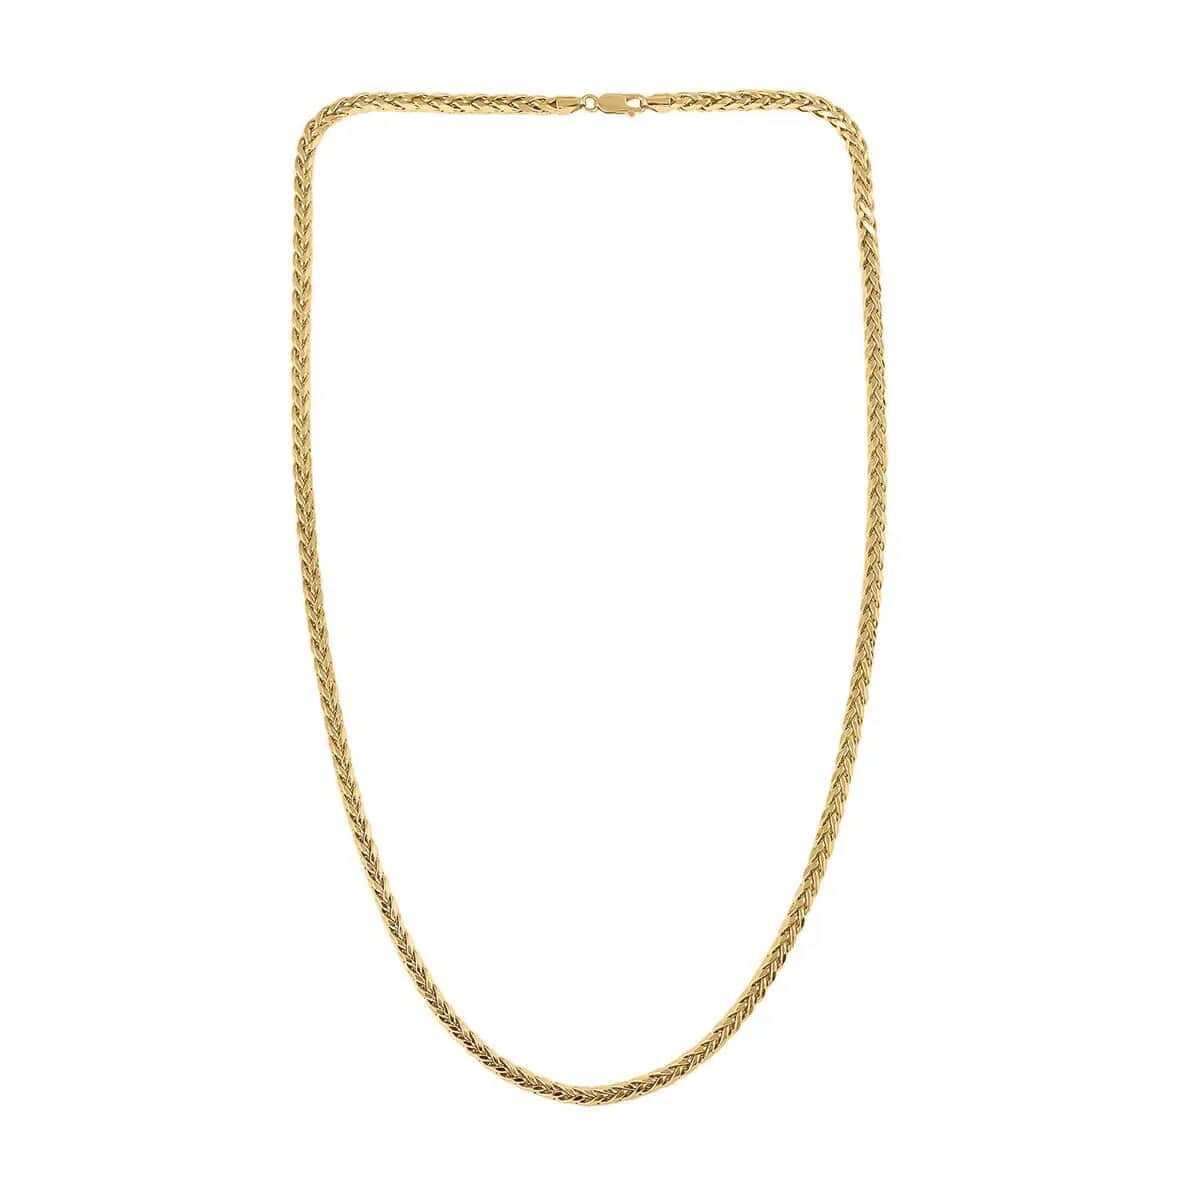 Palma Chain Necklace in 10K Yellow Gold, Gold Palma Necklace, 22 Inch Necklace, Gold Gifts 3mm 8.90Grams image number 5